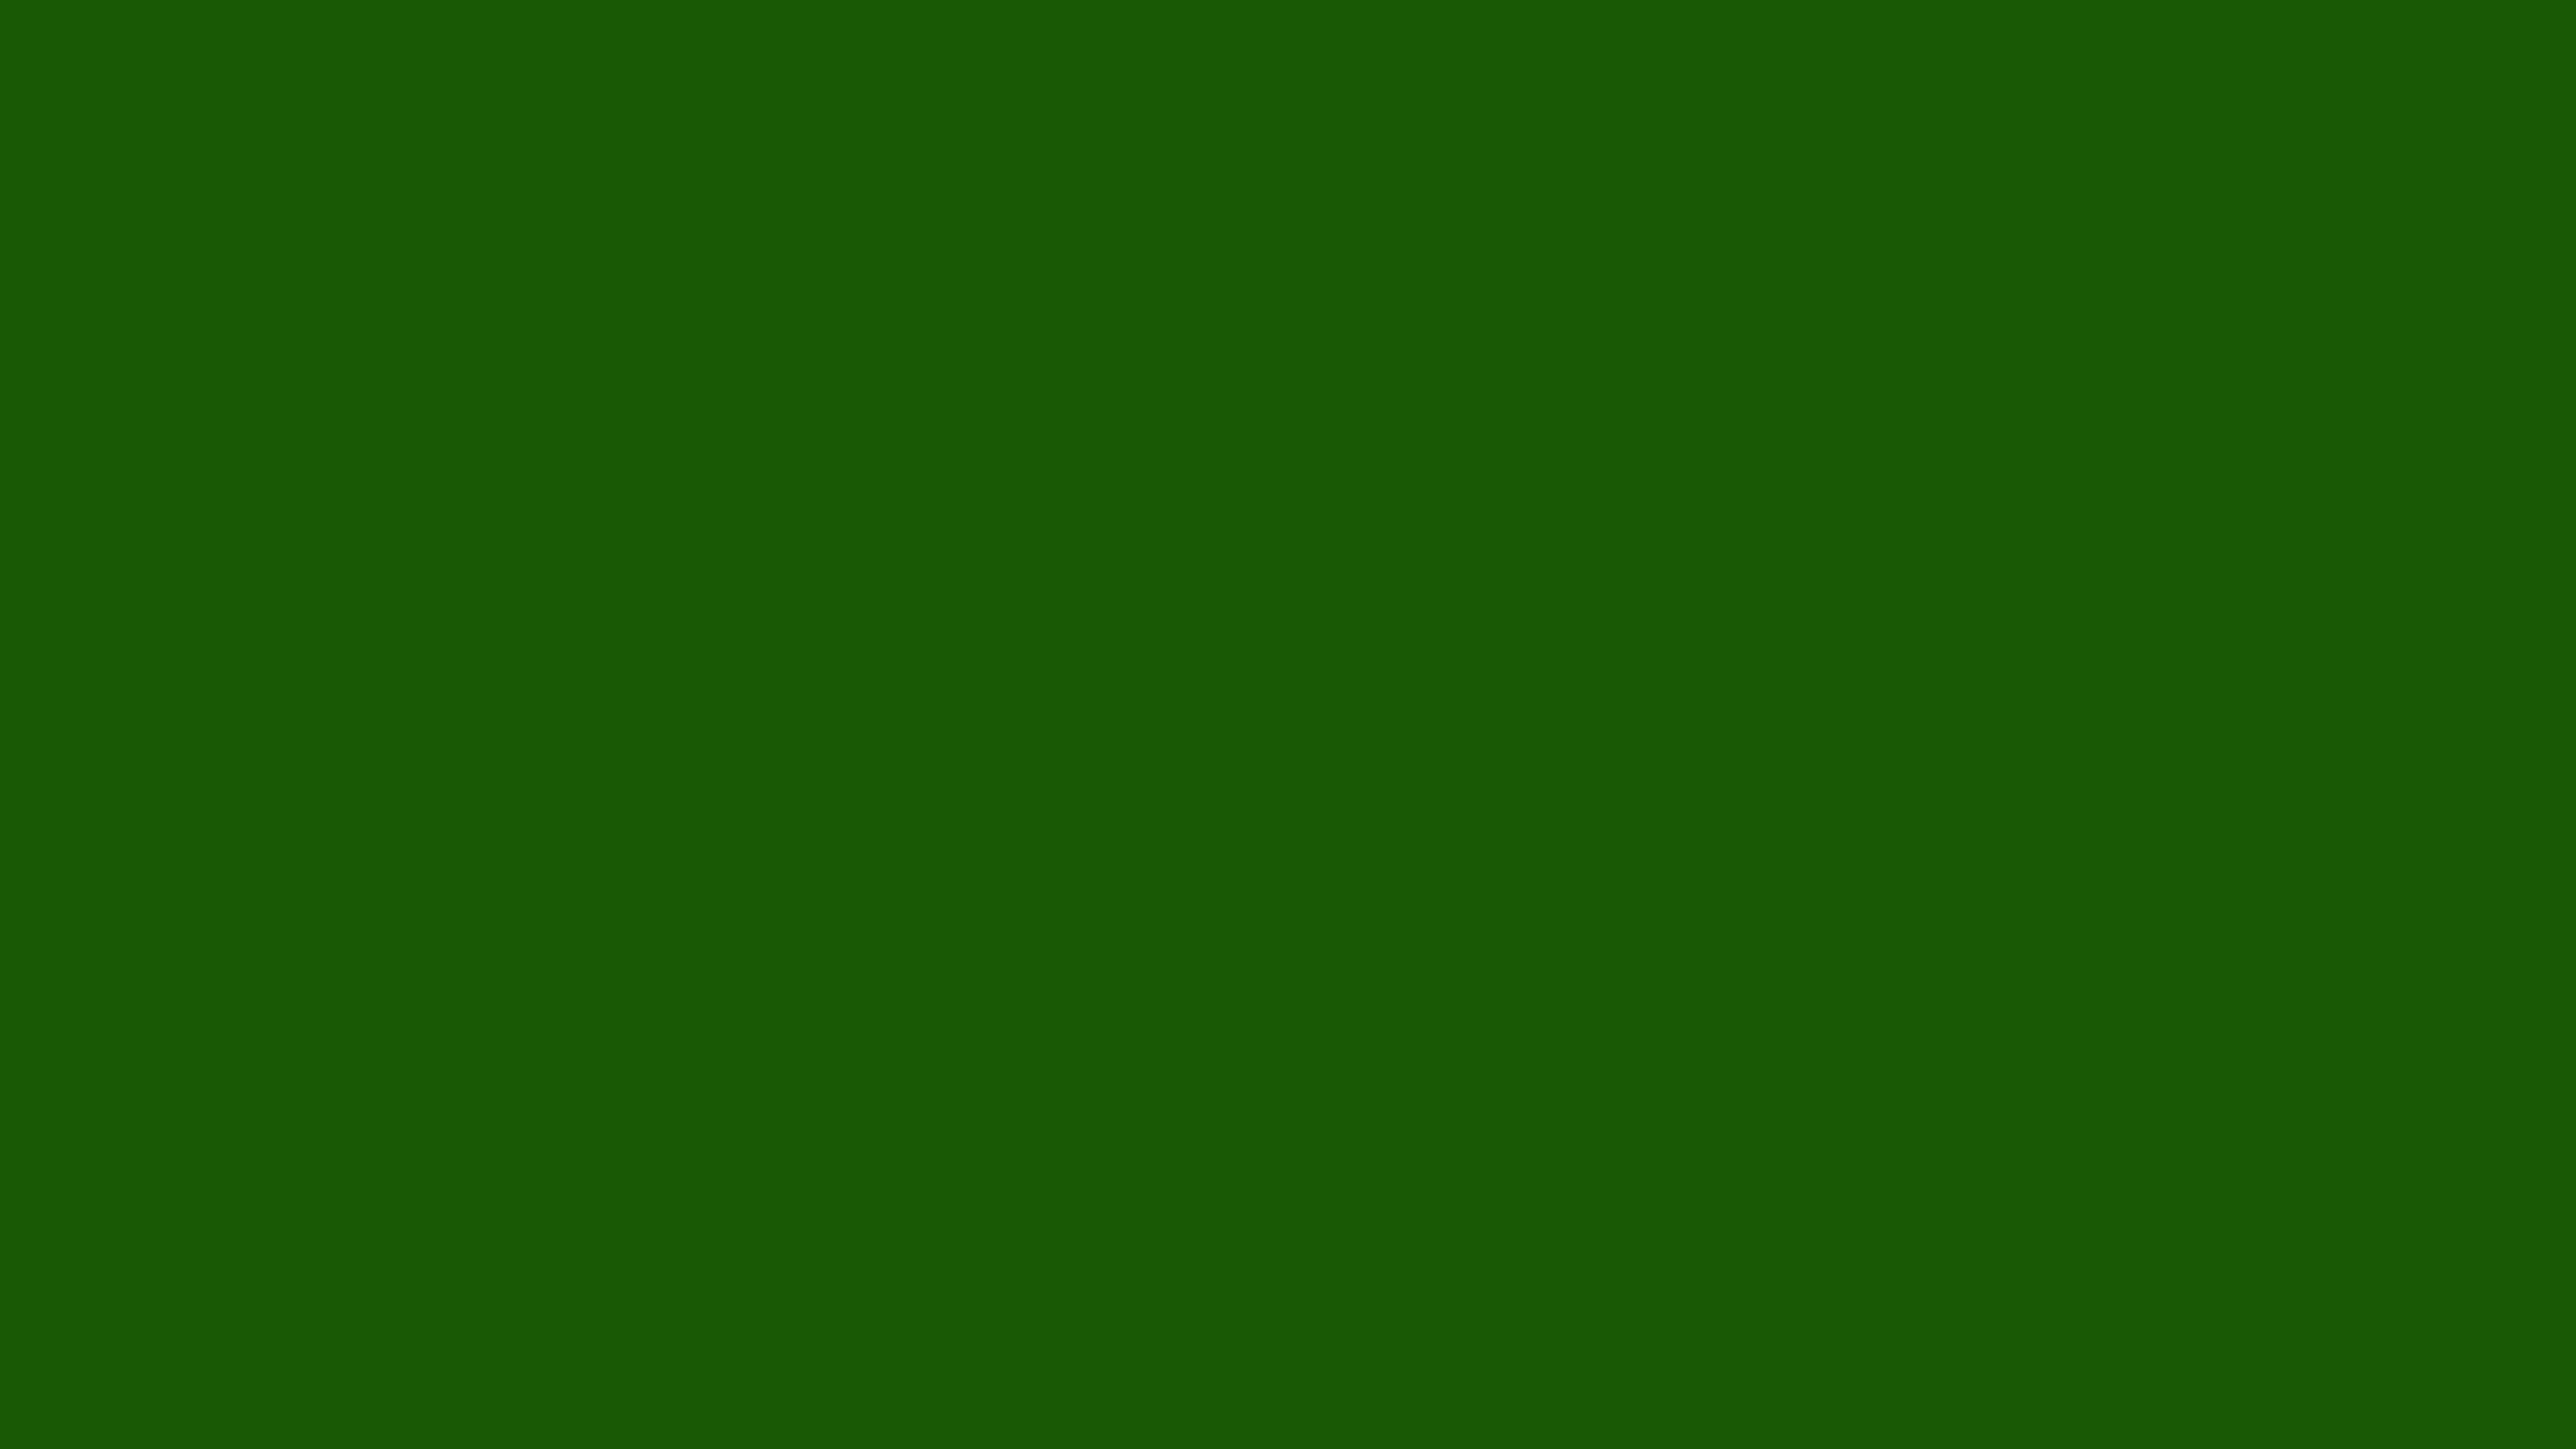 7680x4320 Lincoln Green Solid Color Background